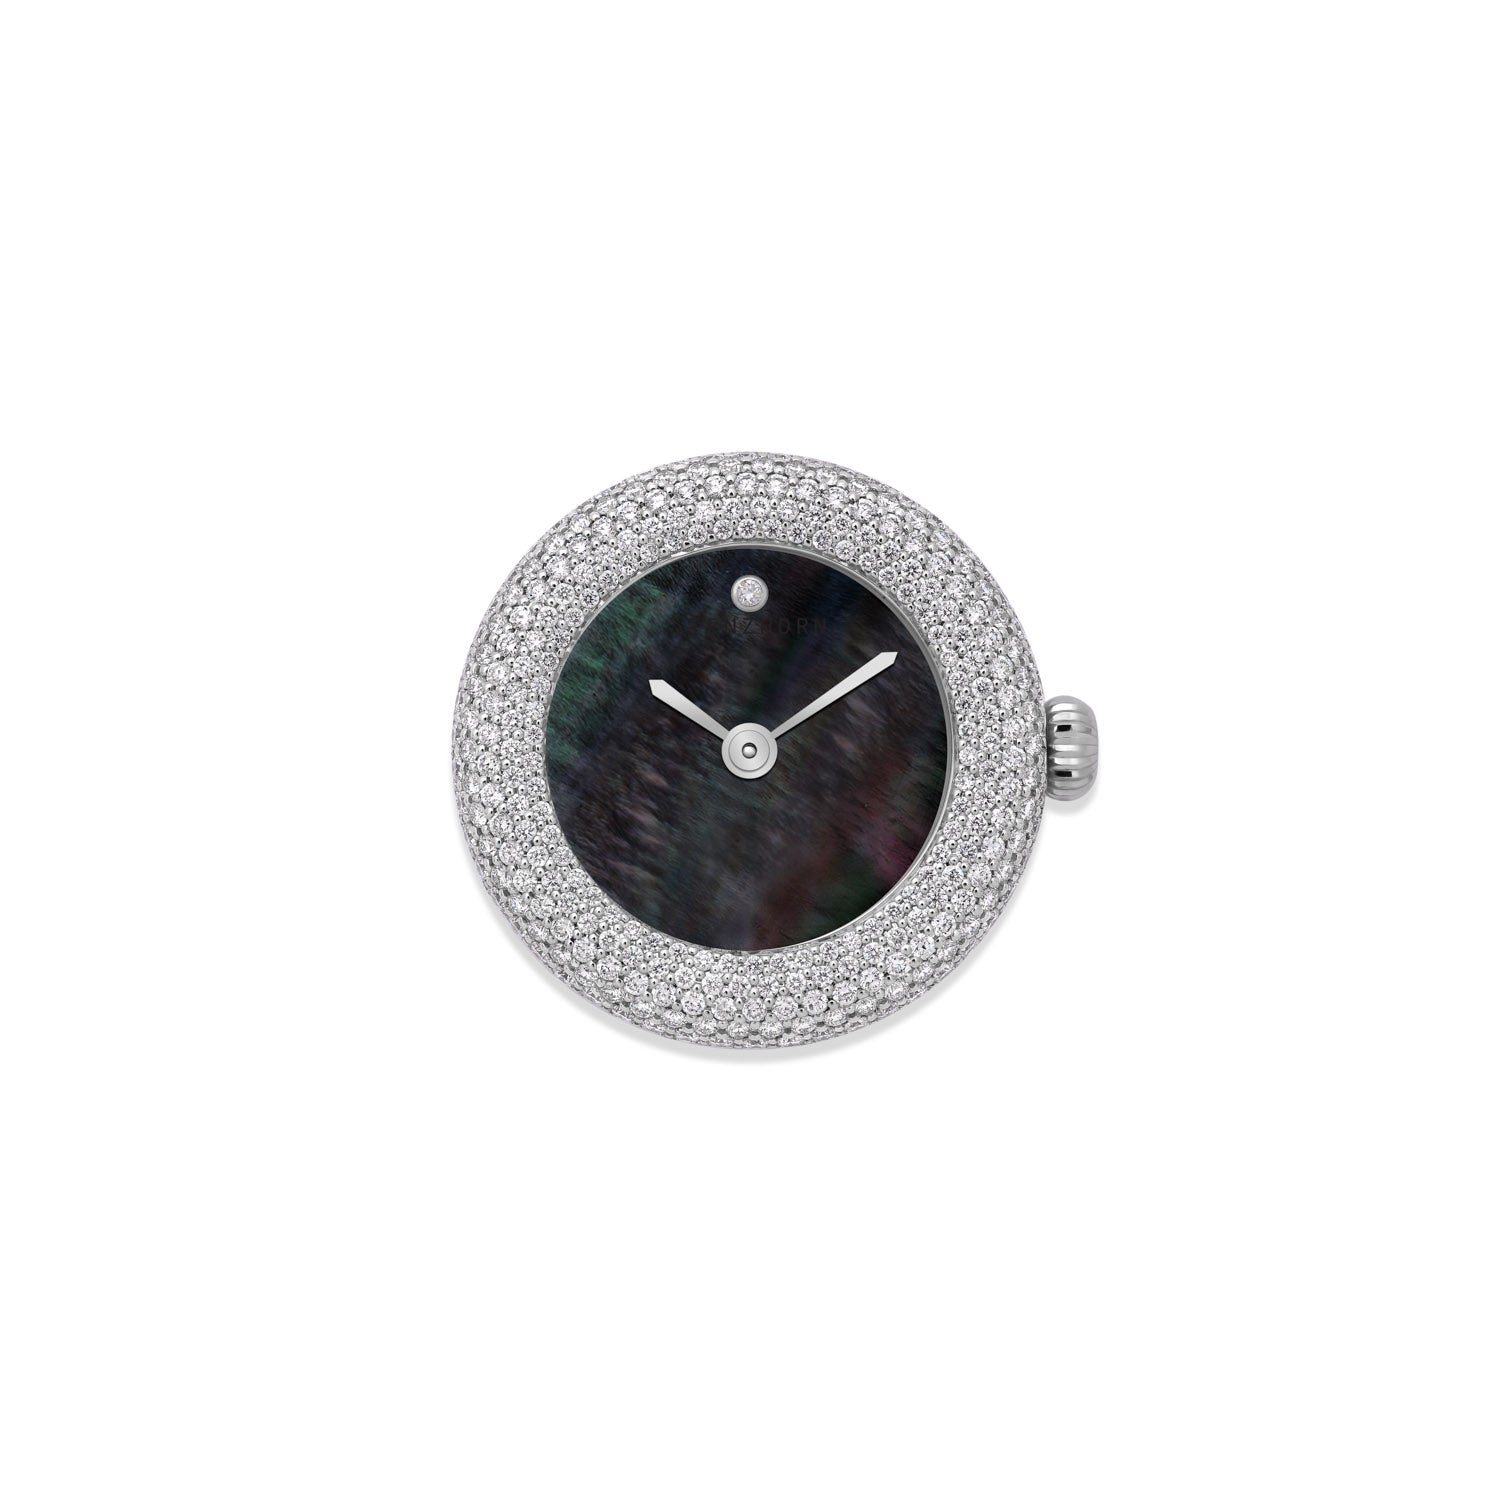 BOUQUET Watch, Black Mother of Pearl and Diamonds